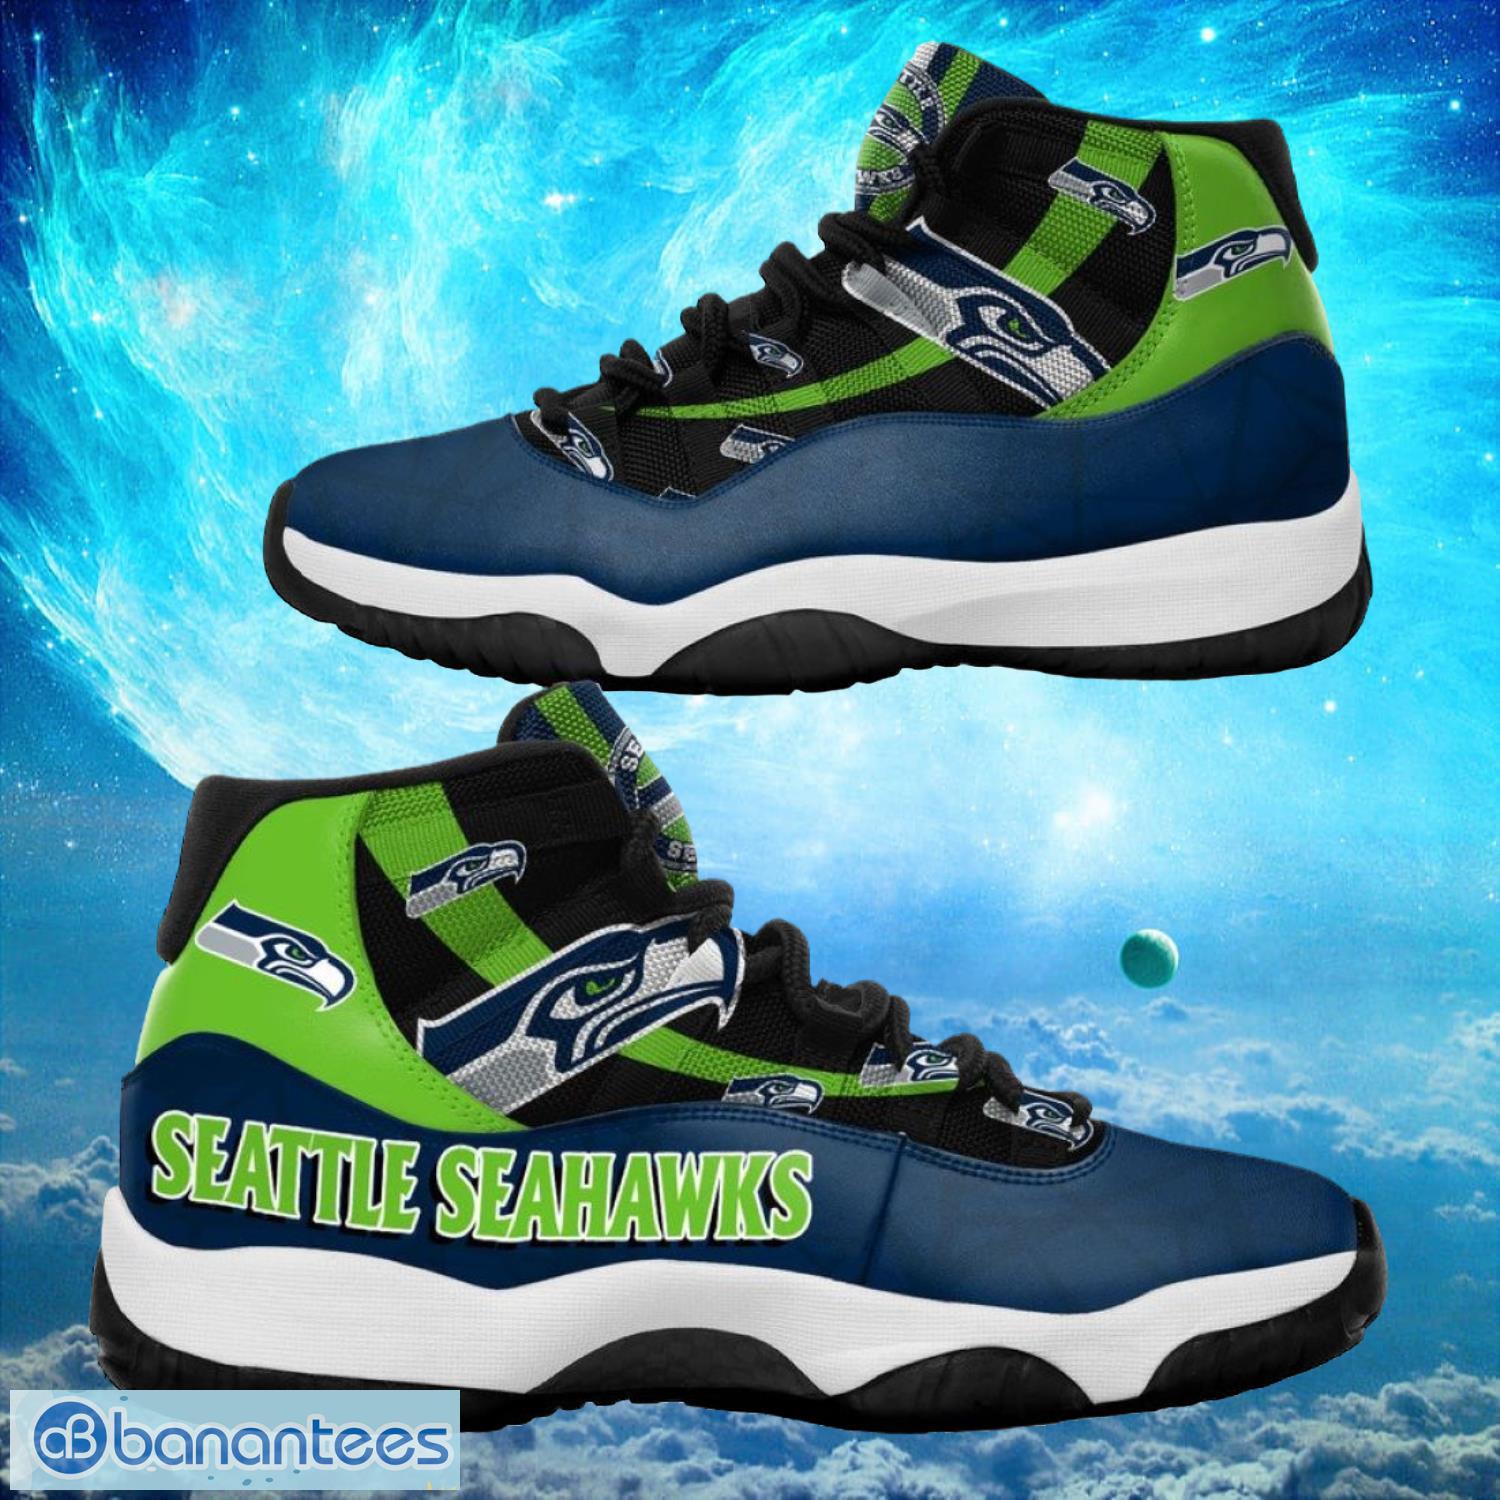 Seattle Seahawks NFL Air Jordan 11 Sneakers Shoes Gift For Fans Product Photo 1